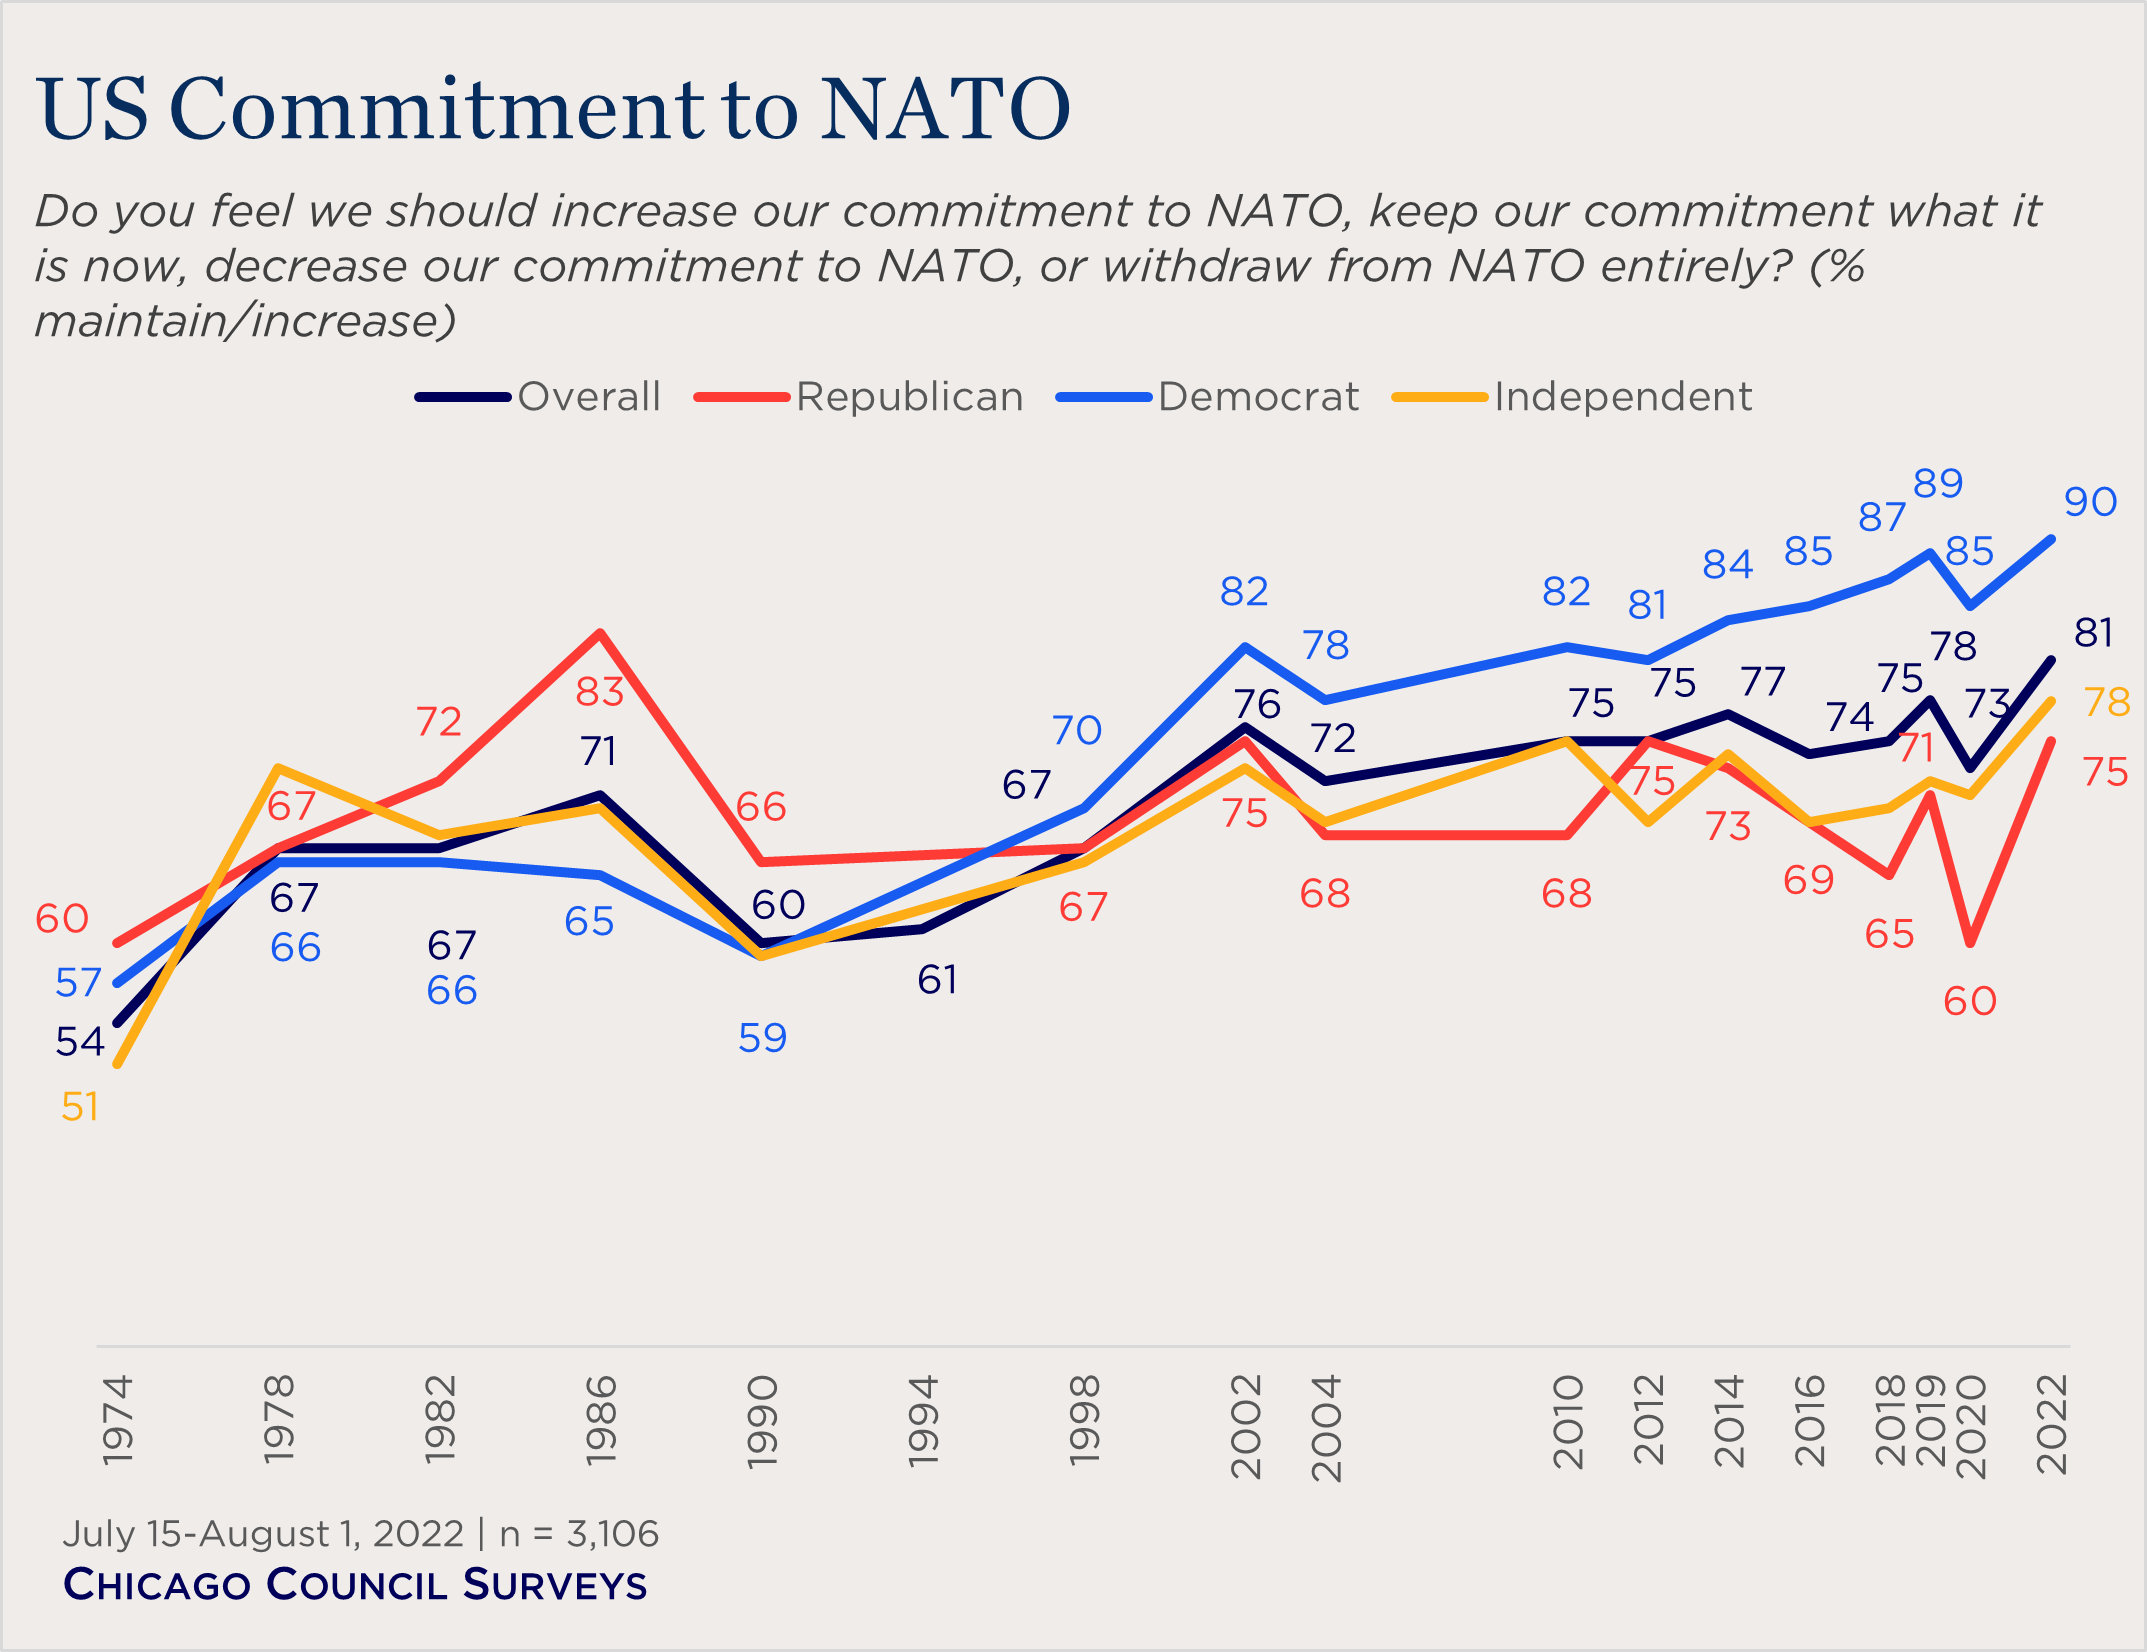 "line chart showing views on maintaining or increasing commitment to NATO over time"